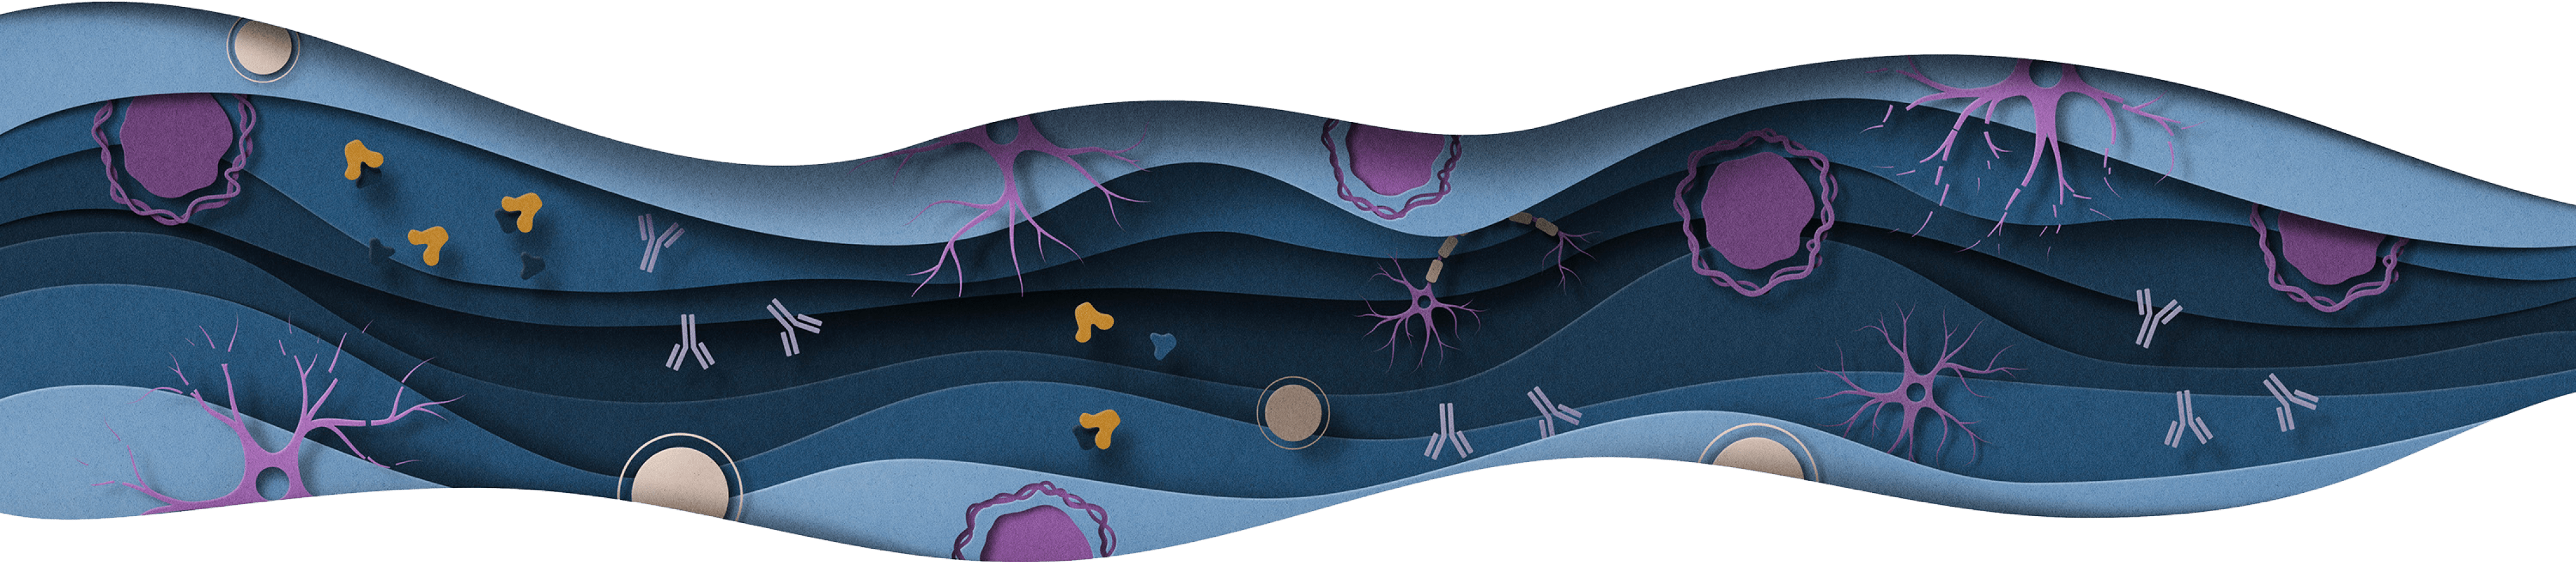 Artwork of cells and astrocytes